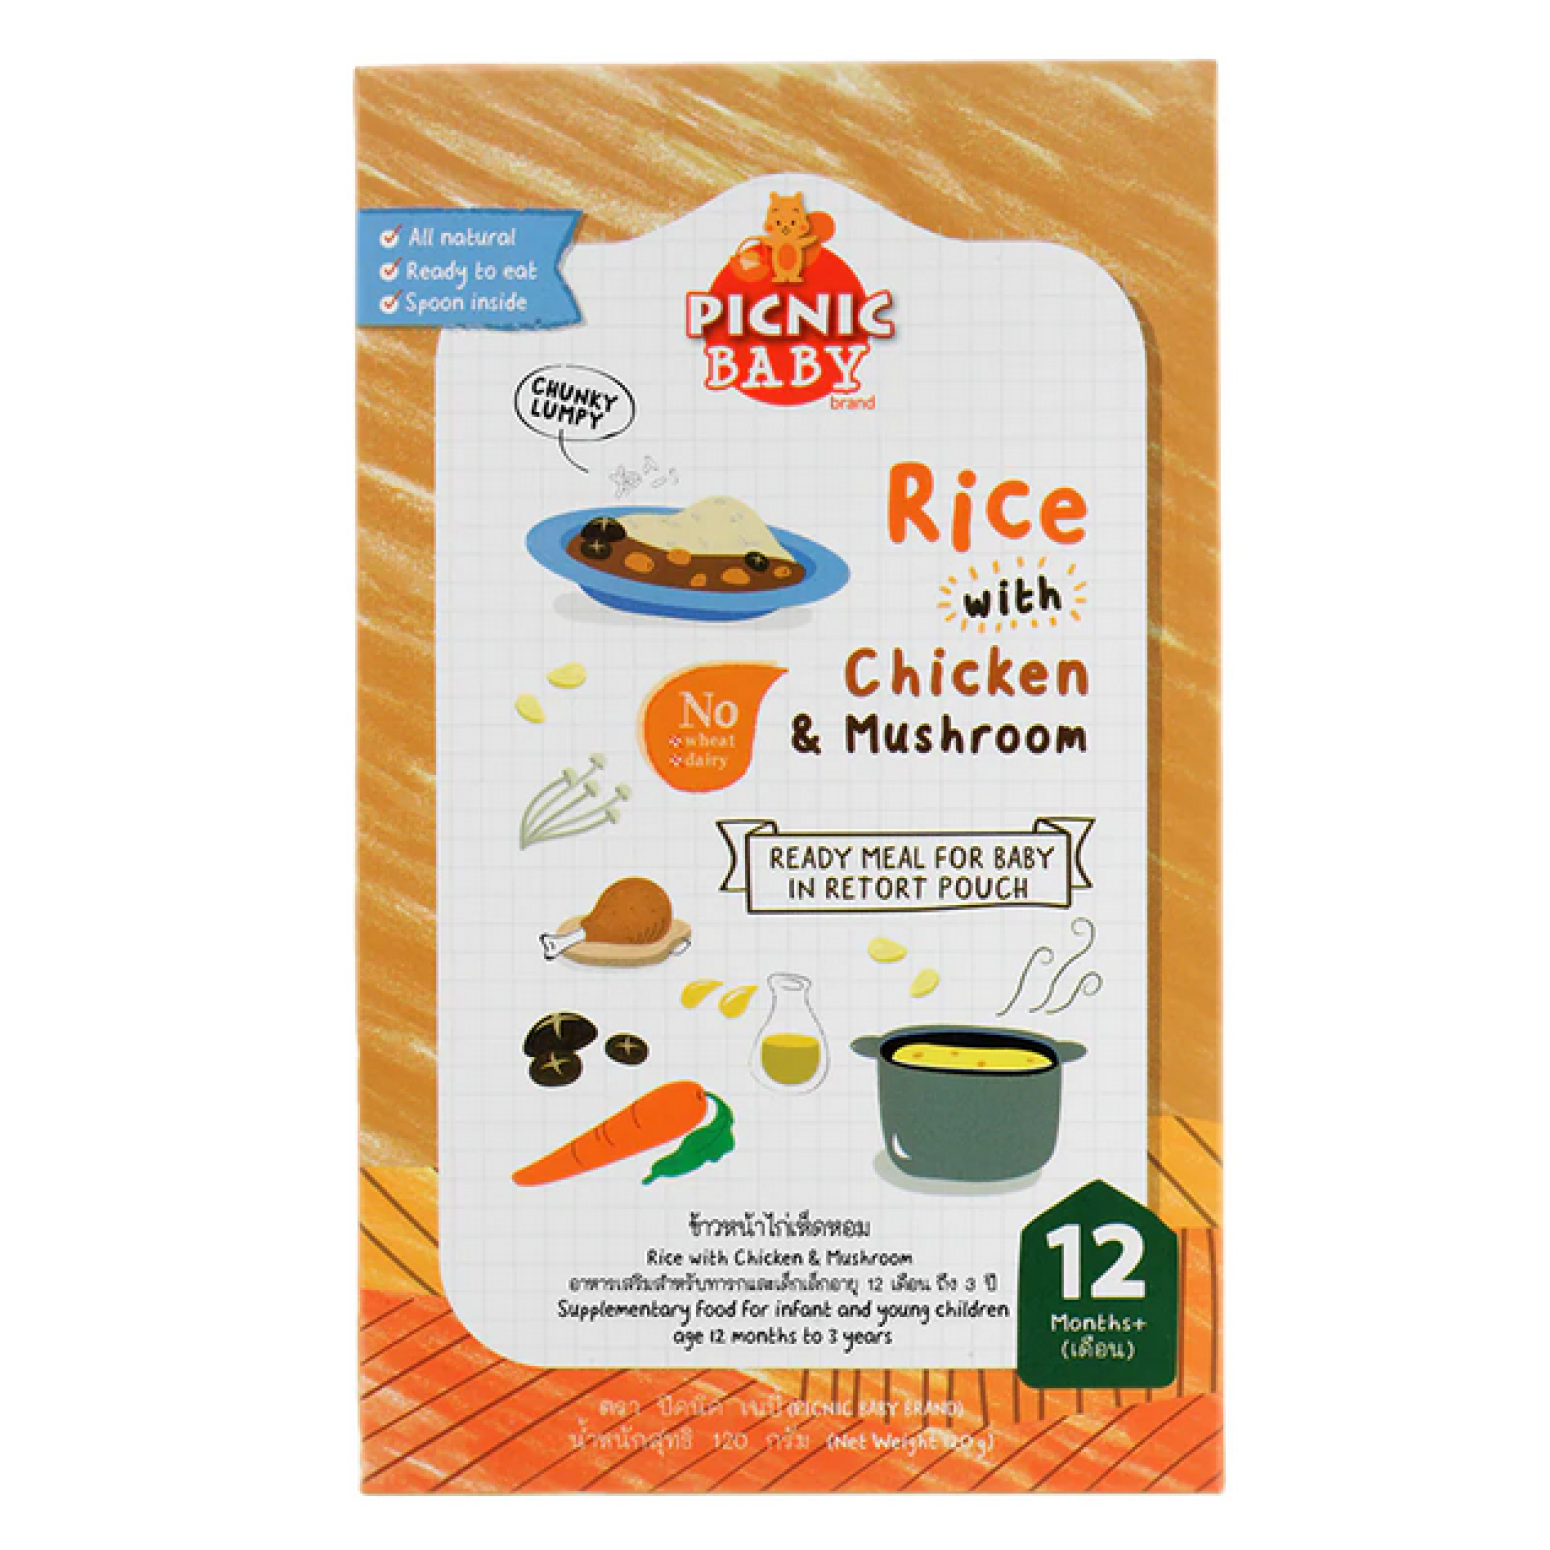 Picnic BabyRice with Chicken and Mushroom Infant and YoungChildrenage 12 Month to3 year 120g